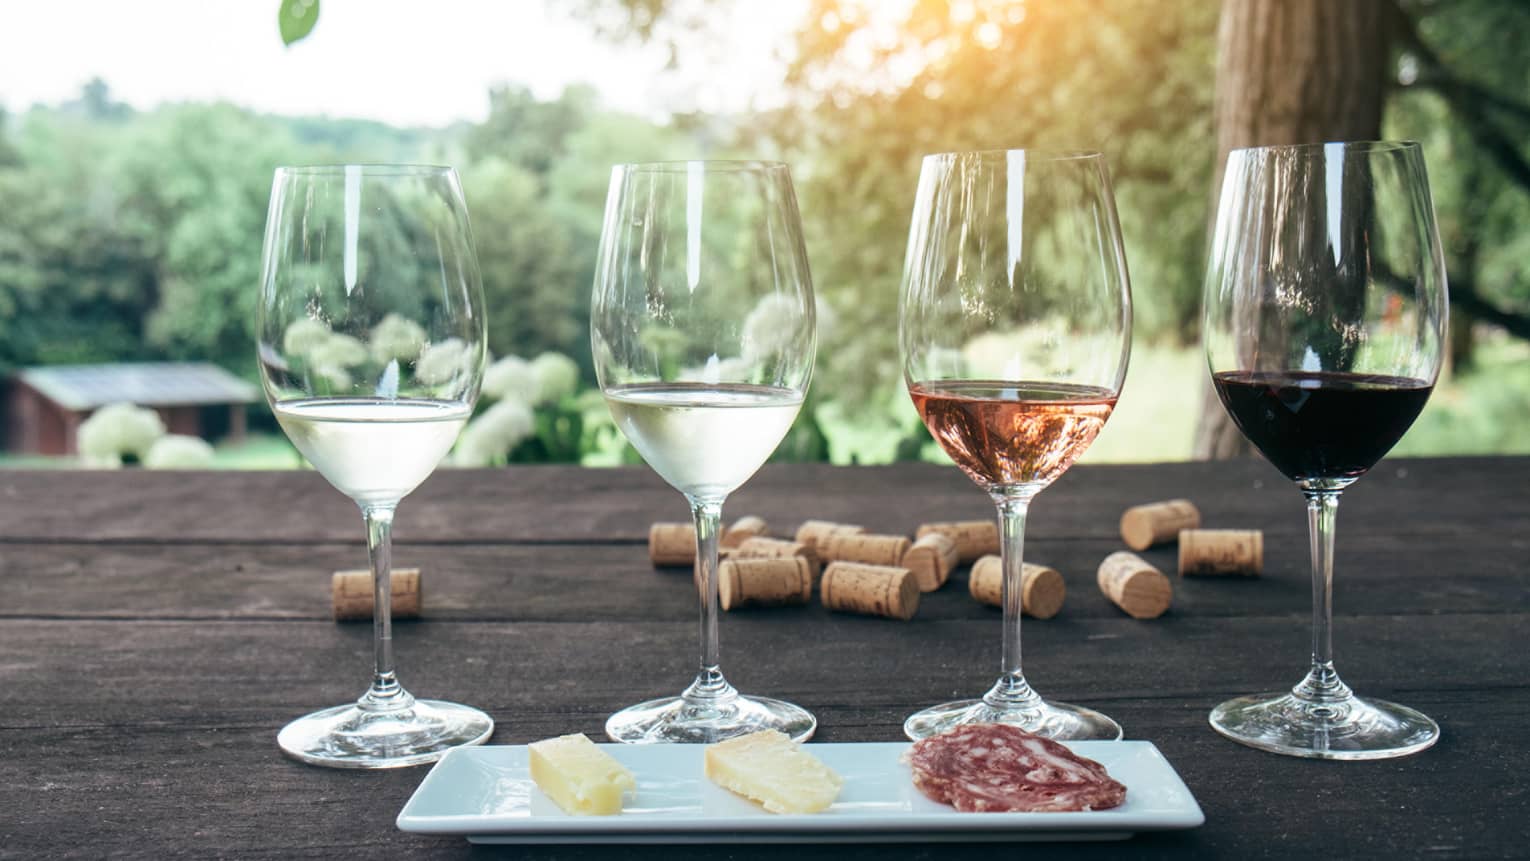 Tasting glasses of white, rose and red wine in row behind cheese platter on patio table, corks